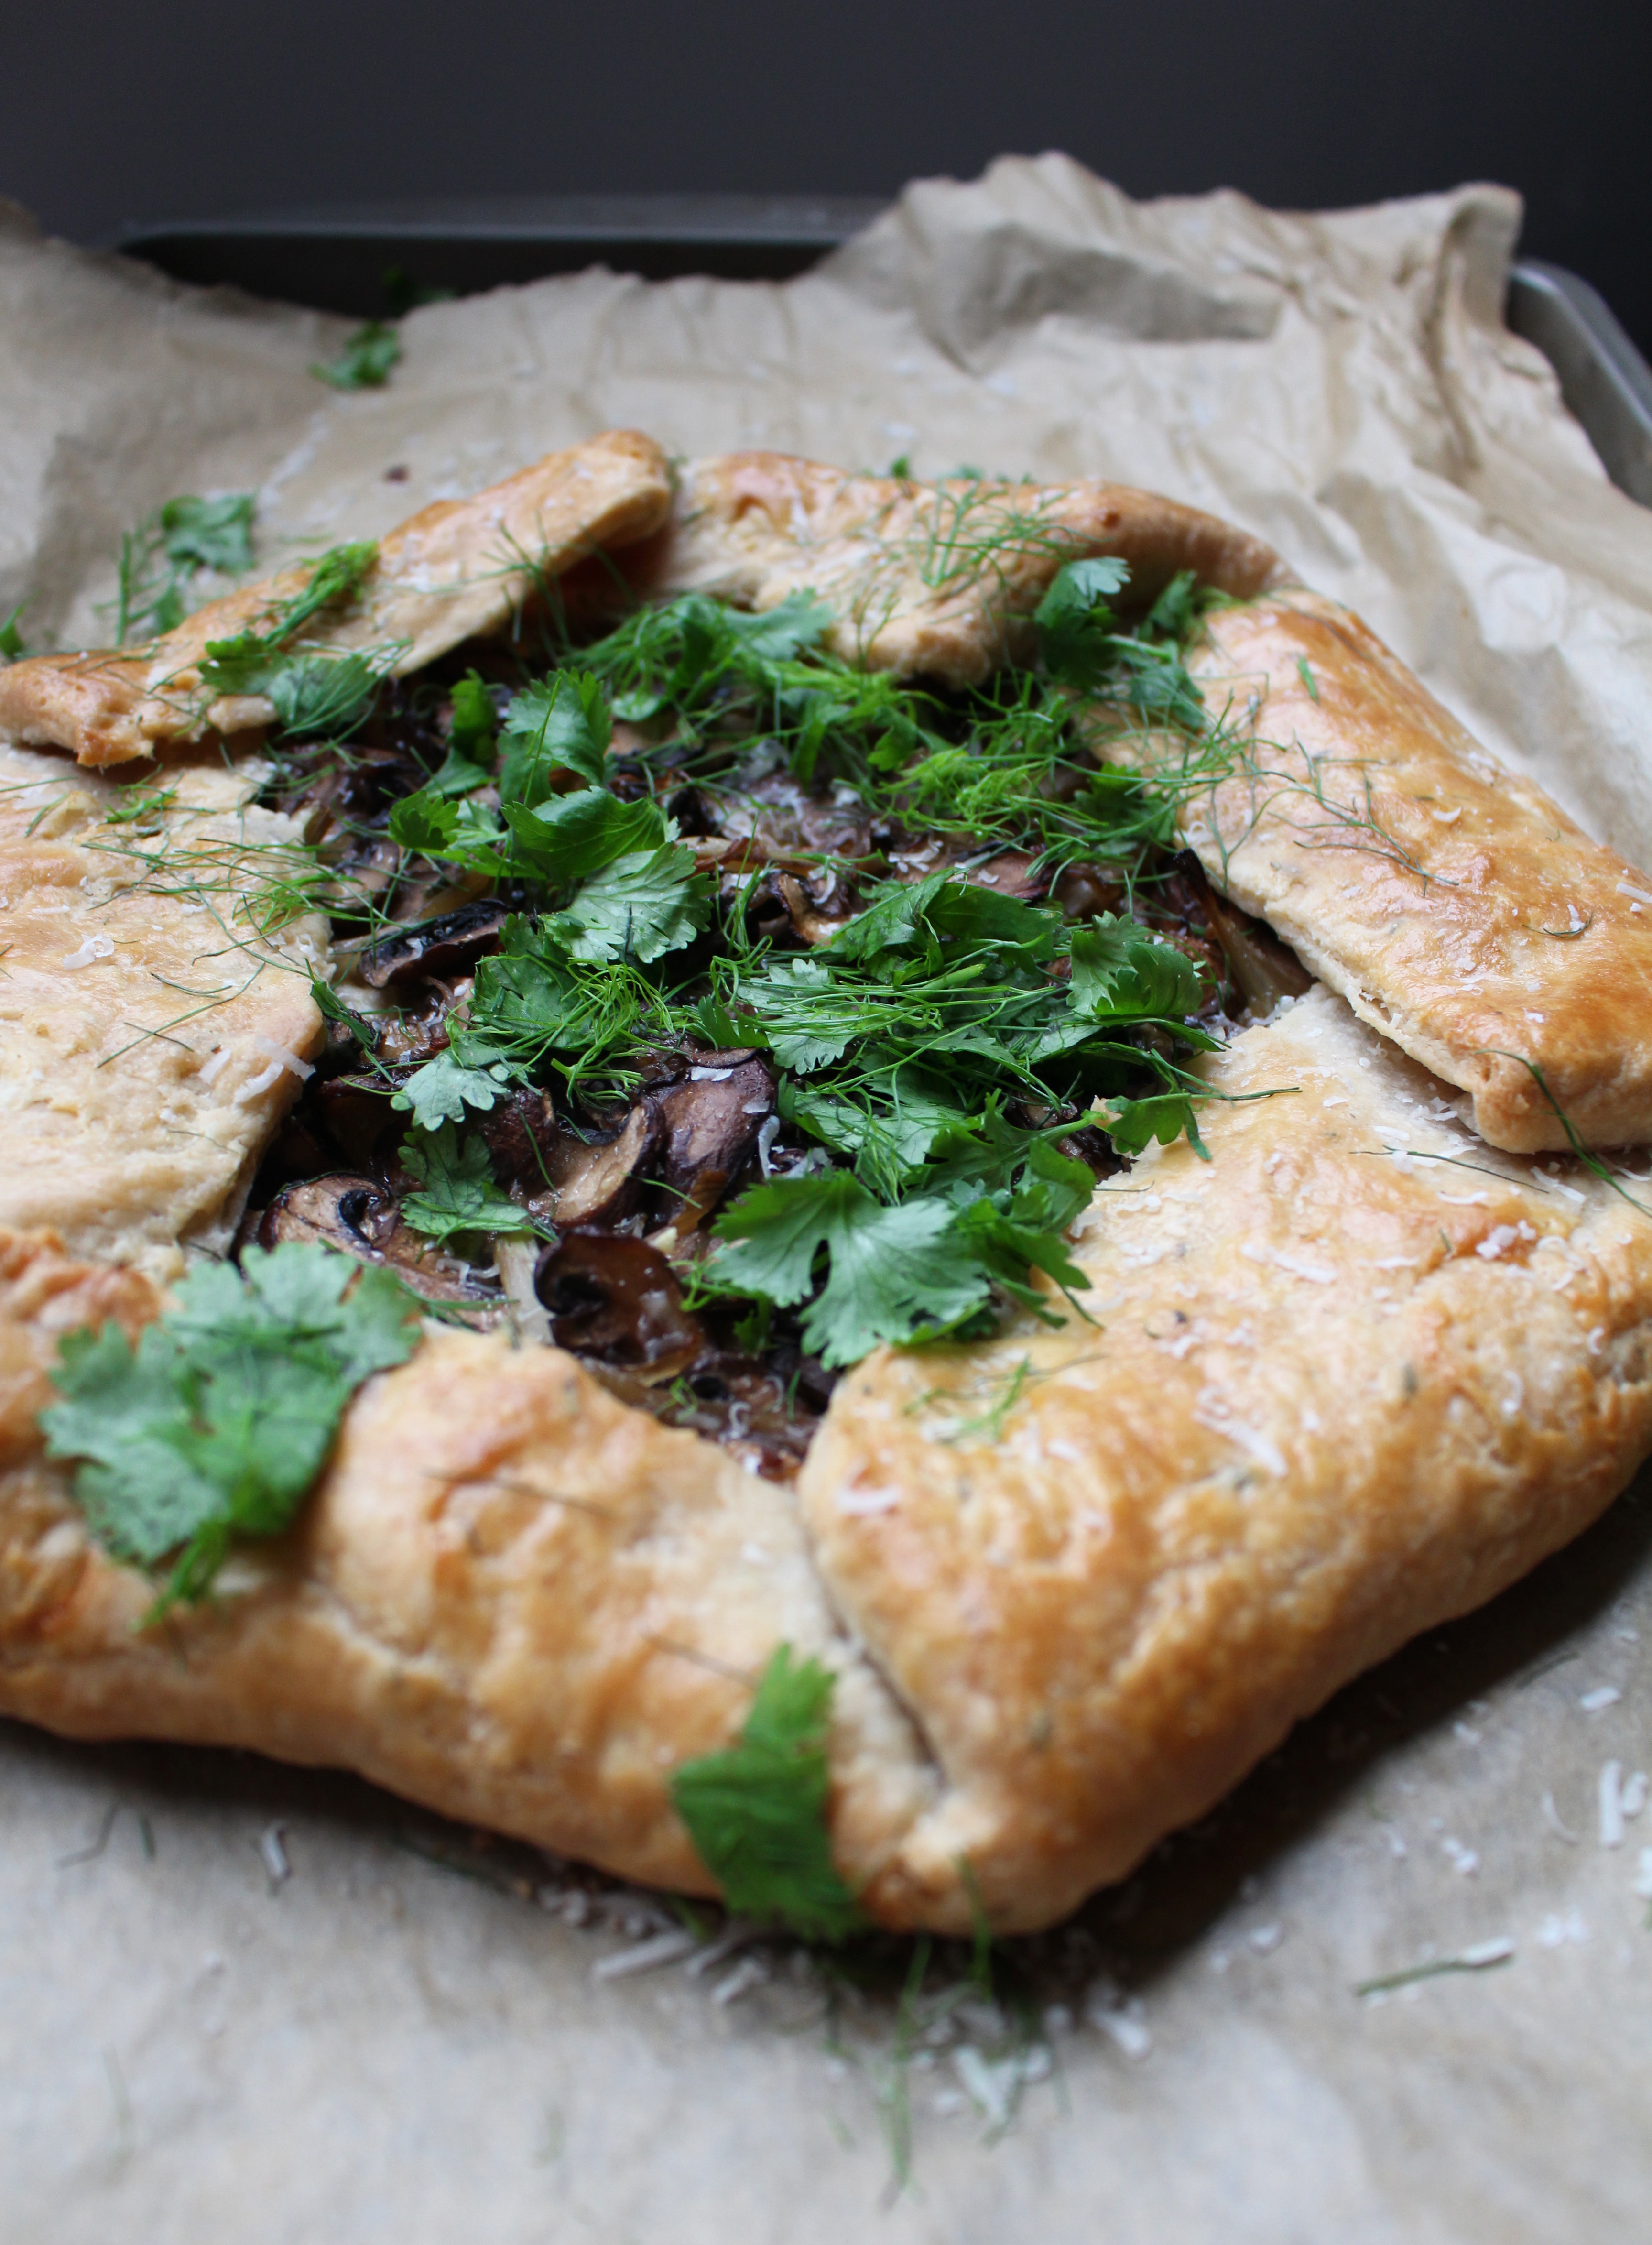 The fluffiest, flaky crust stuffed with ricotta, mushrooms, and fennel. This galette is beautiful and surprisingly simple!